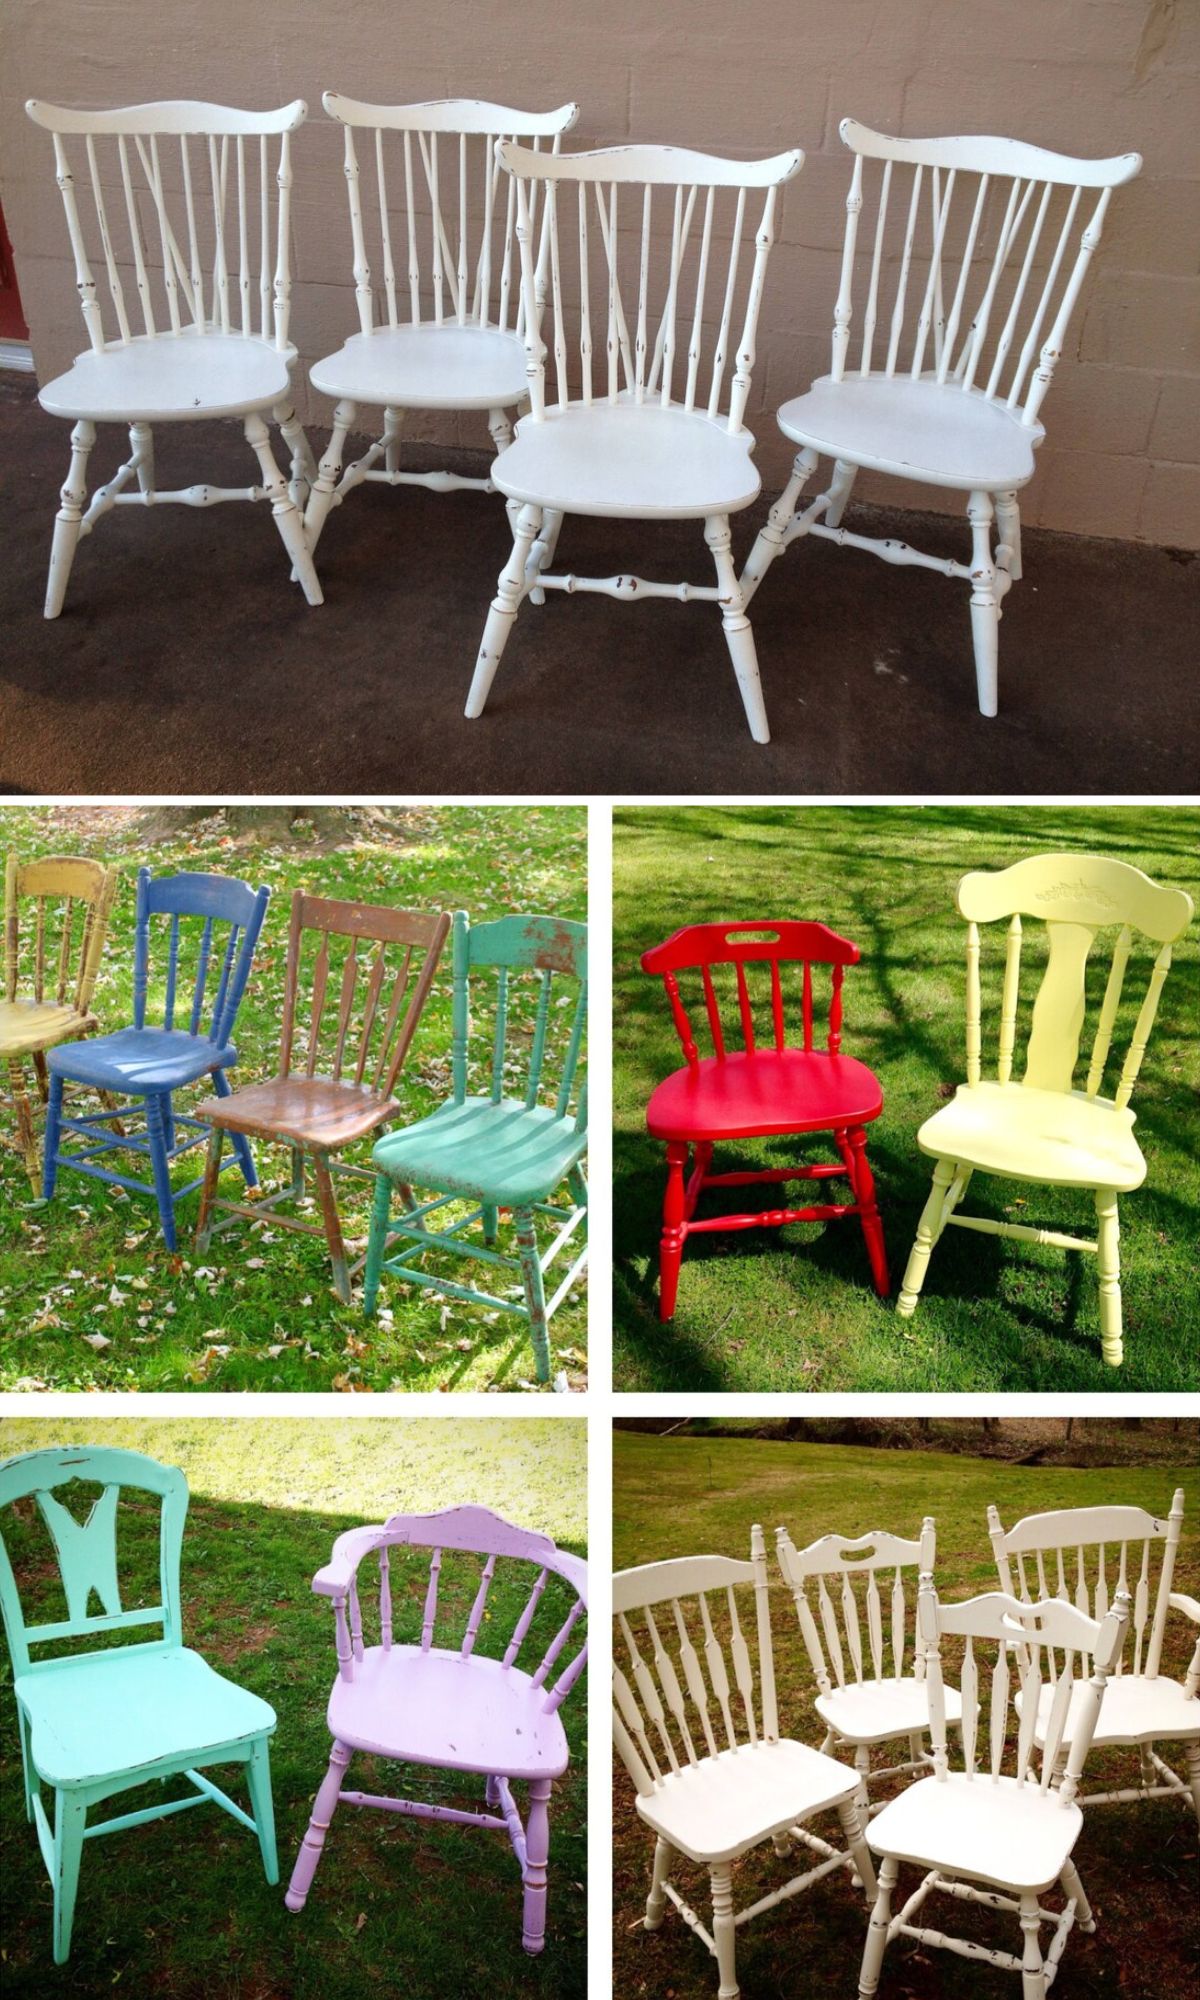 Farmhouse Distressed Chairs collage.